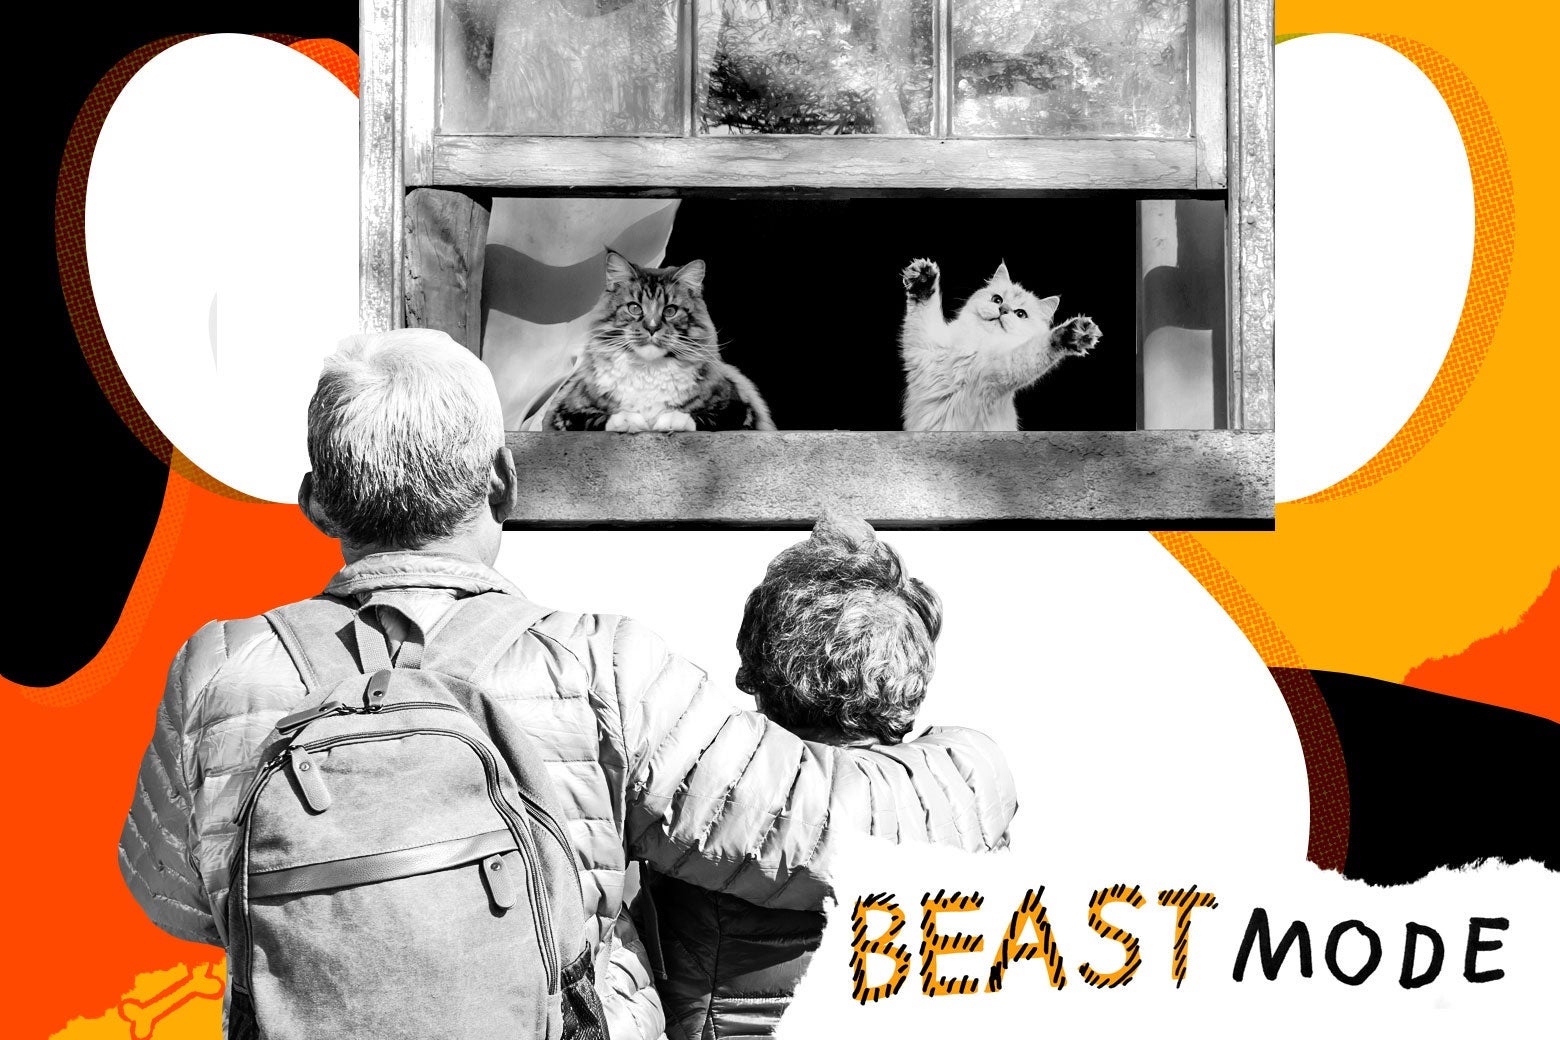 Photo illustration of an older couple watching a pair of cats through a window.